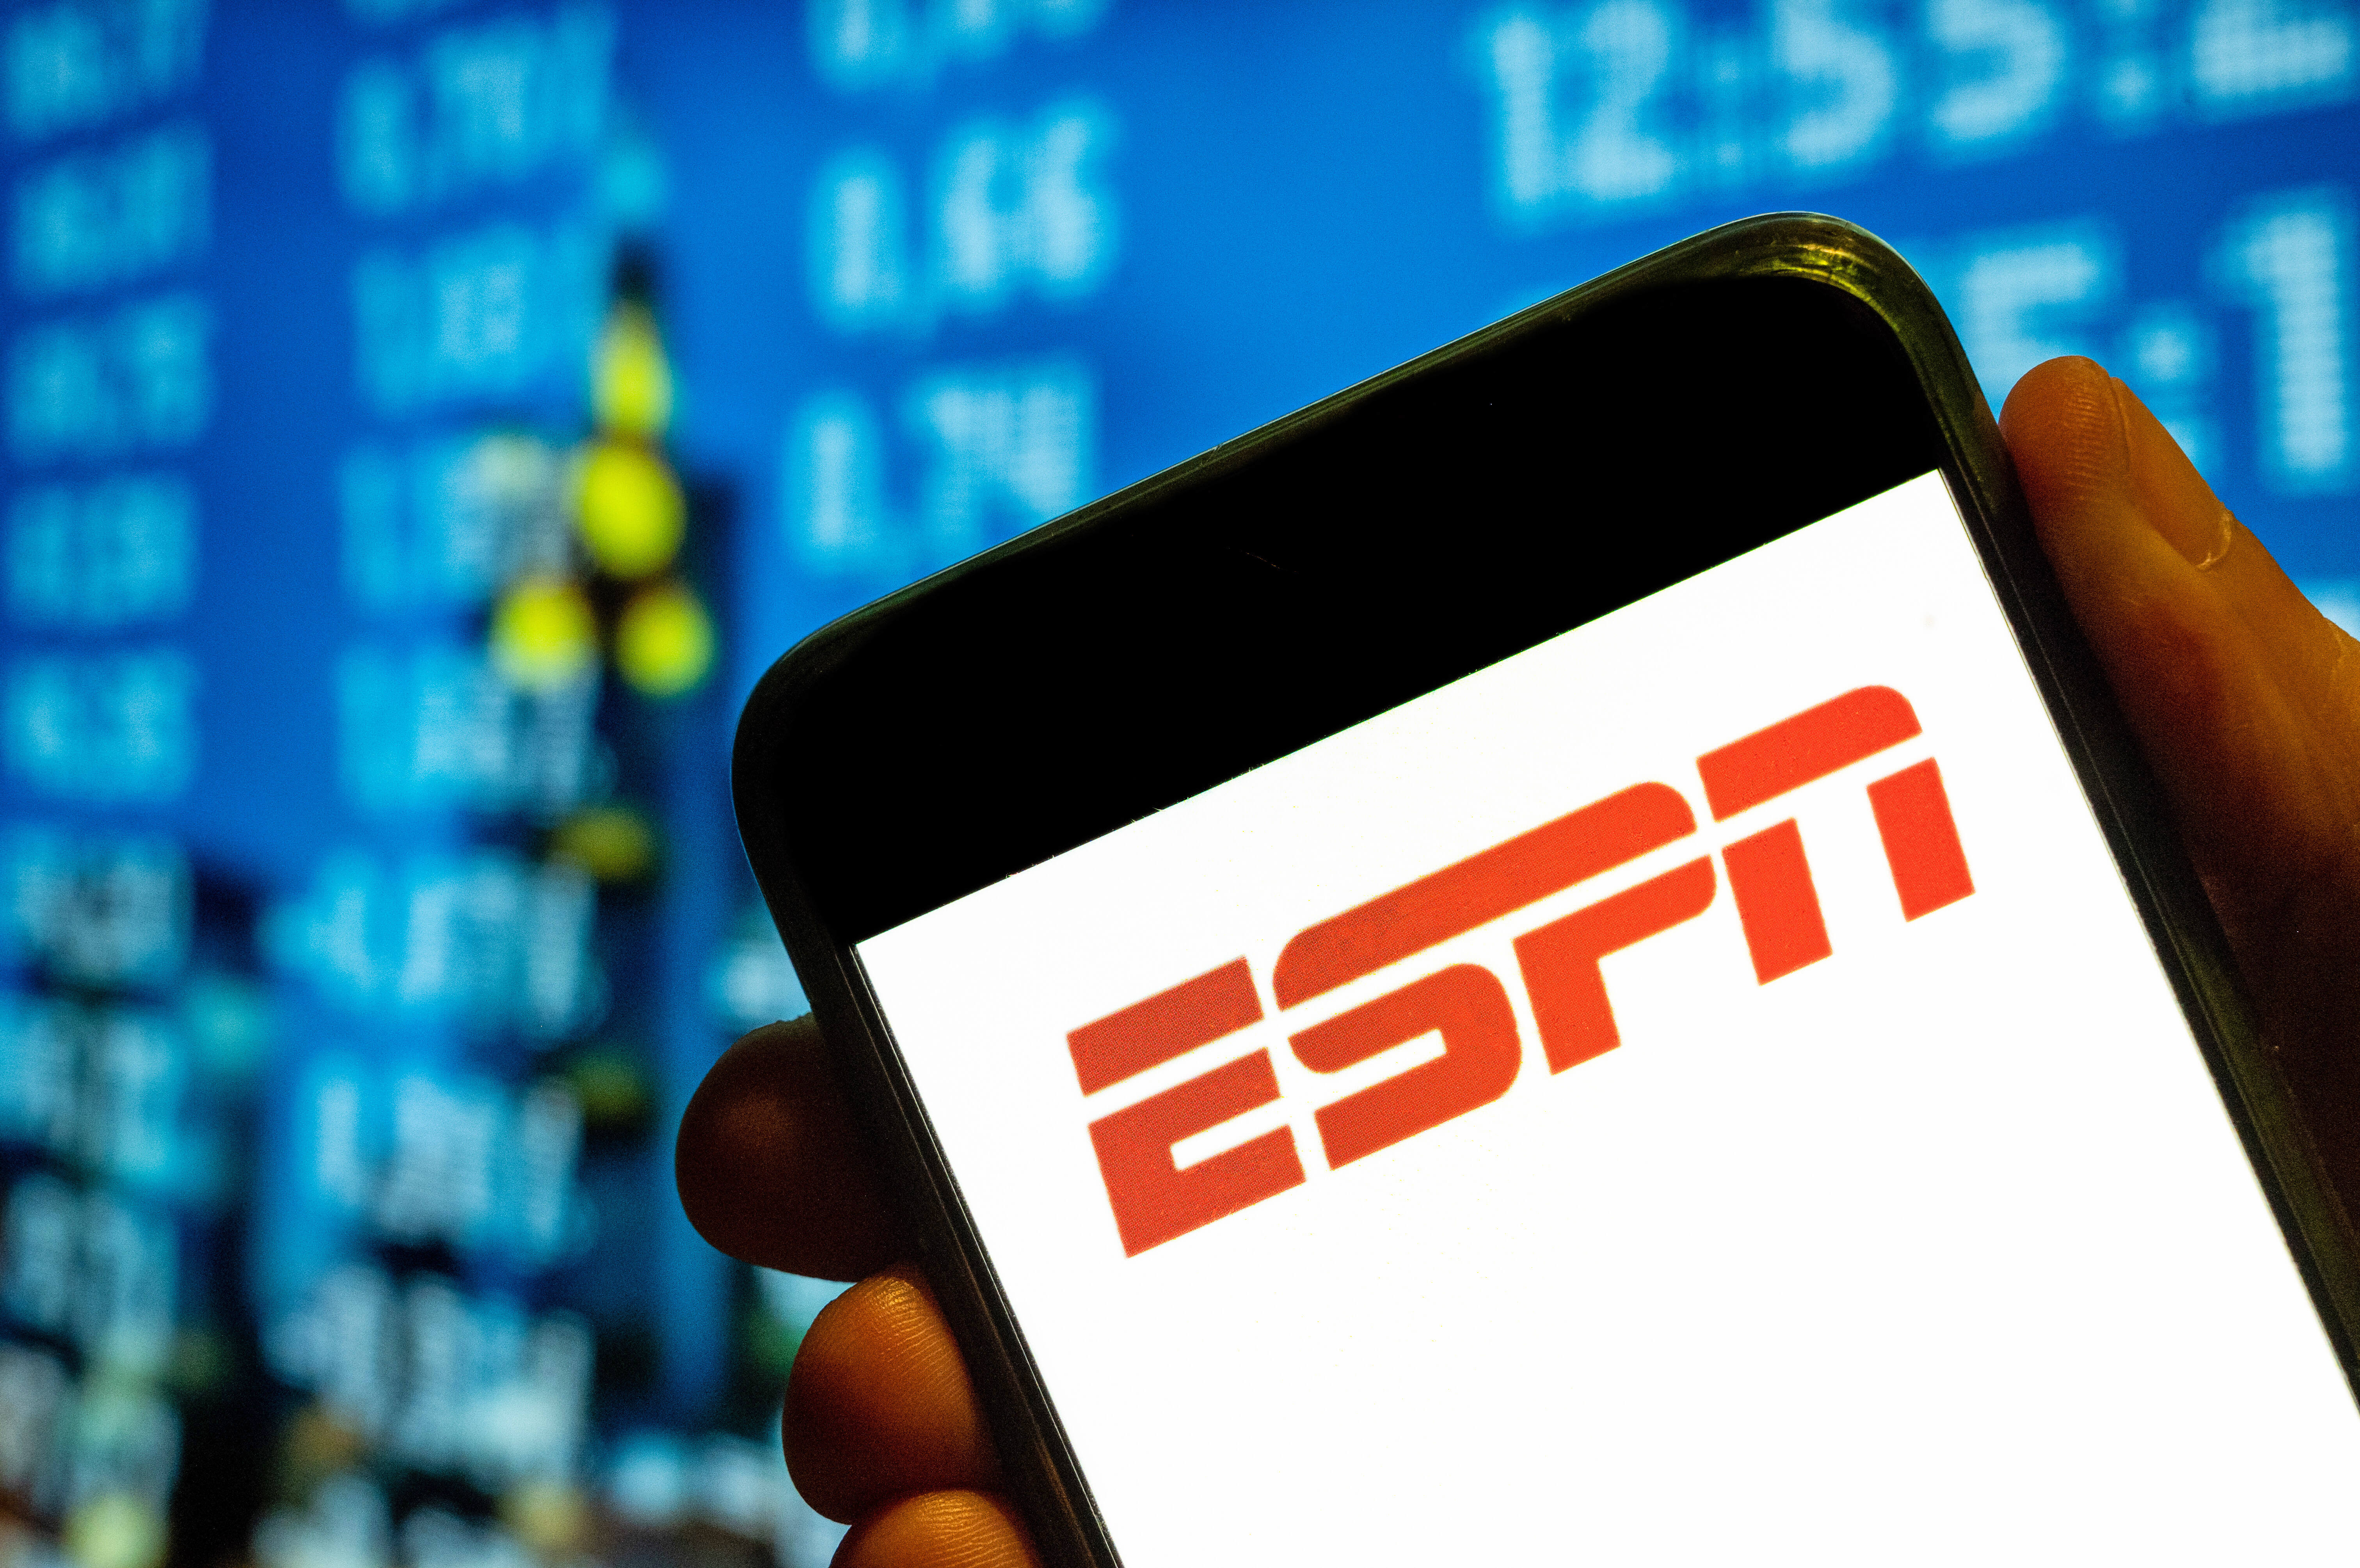 ESPN BET Jumps to No. 1 'Top Free Apps' on Apple Following Launch